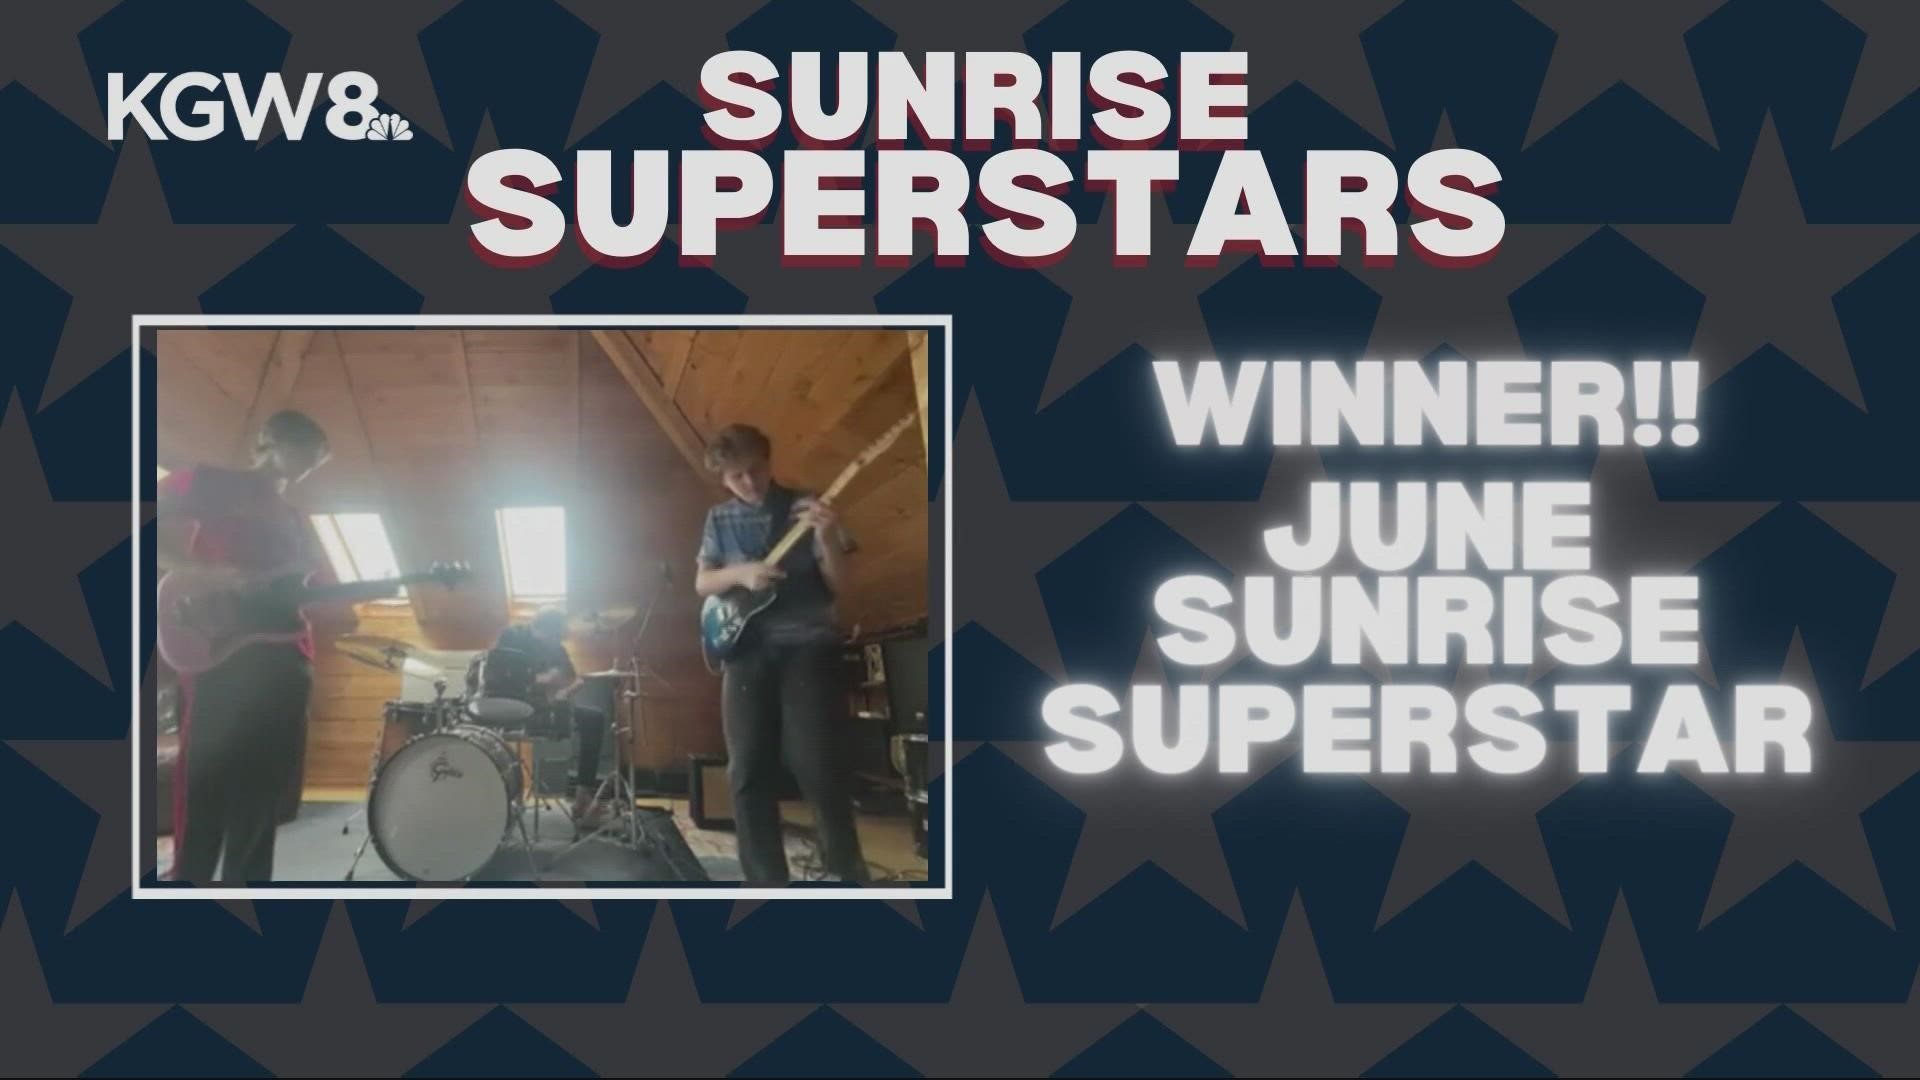 The June finalist has the chance to compete for the grand finale prize of performing on KGW News at Sunrise.